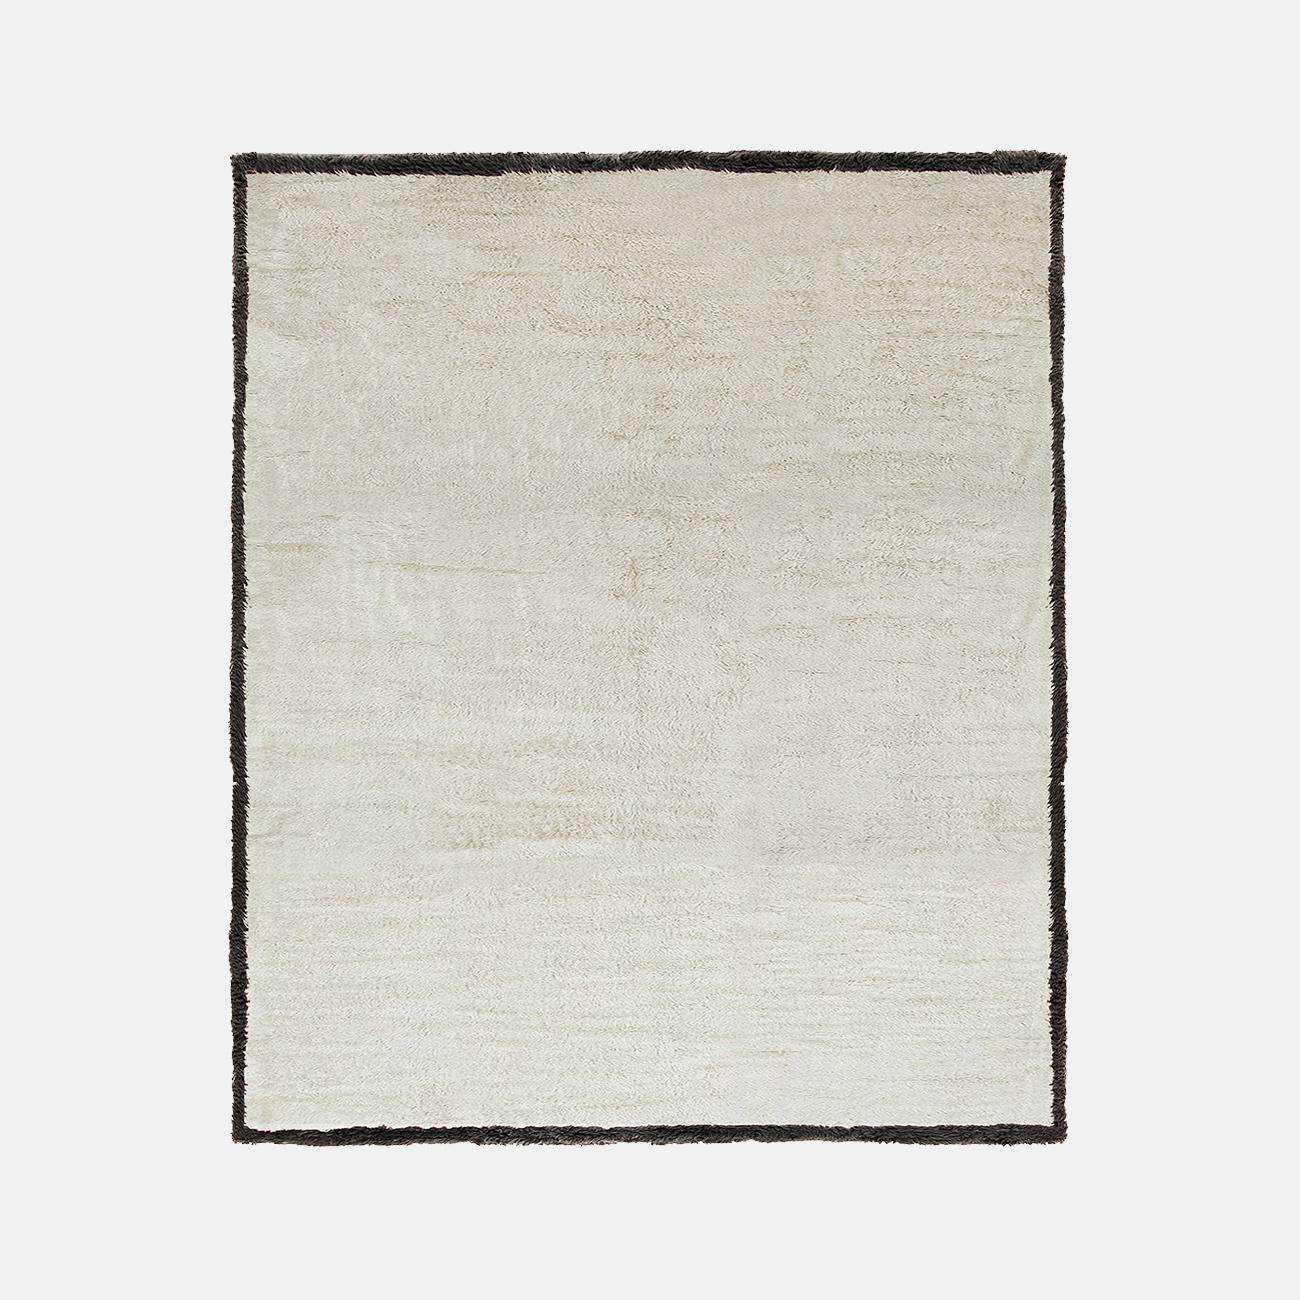 Kimoto Frame Rug by Atelier Bowy C.D.
Dimensions: W 243 x L 300 cm.
Materials: Wool, silk.

Available in Night version.
Available in D170, D200, D240, W140 x L220, W170 x L240, W210 x L300, W243 x L300 cm.

Atelier Bowy C.D. is dedicated to crafting